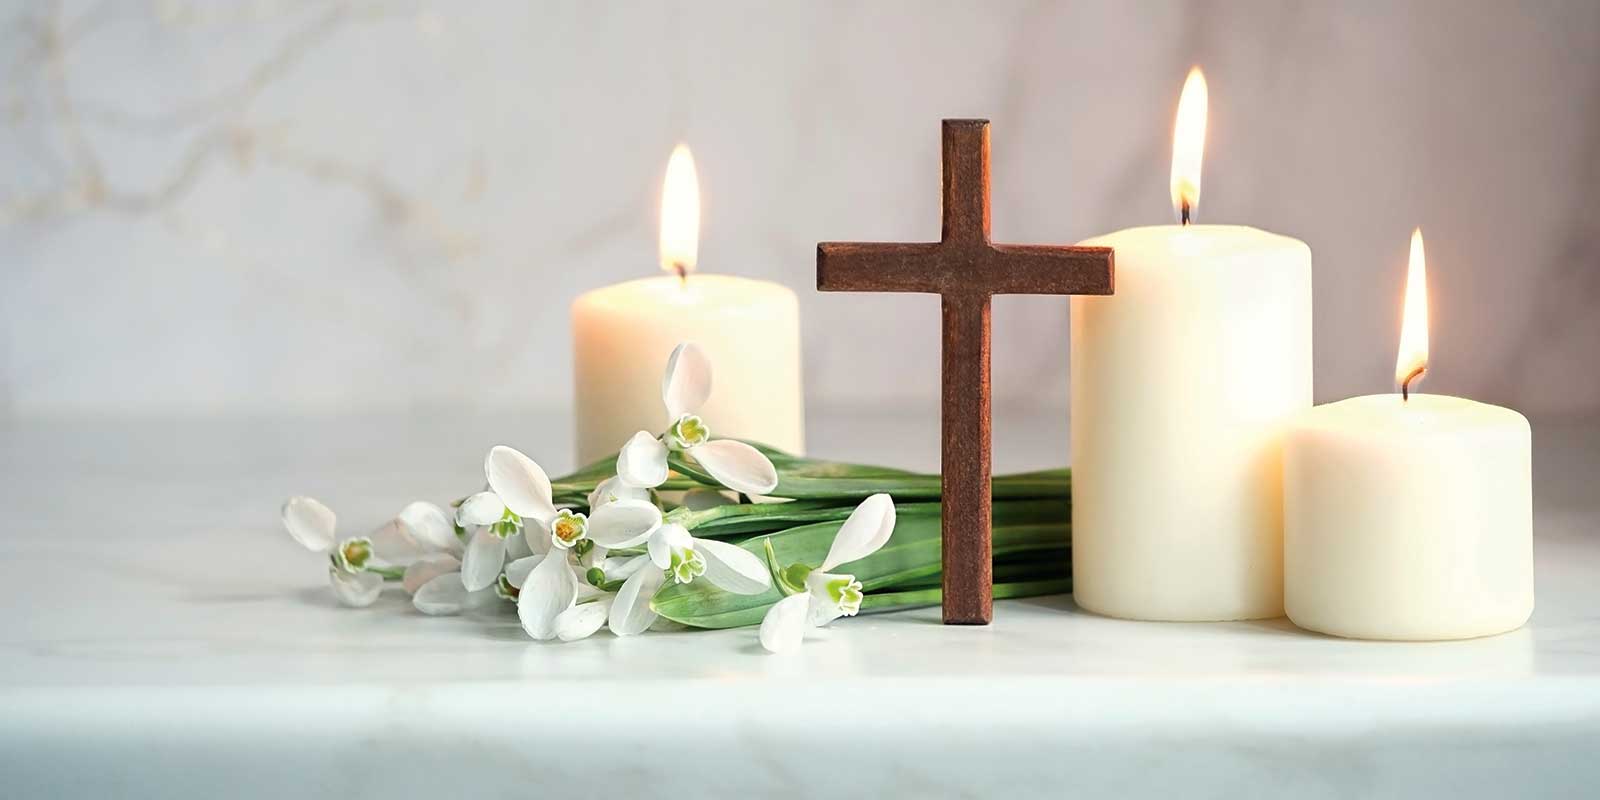 Easter Lillies and Candles with a Wooden Cross